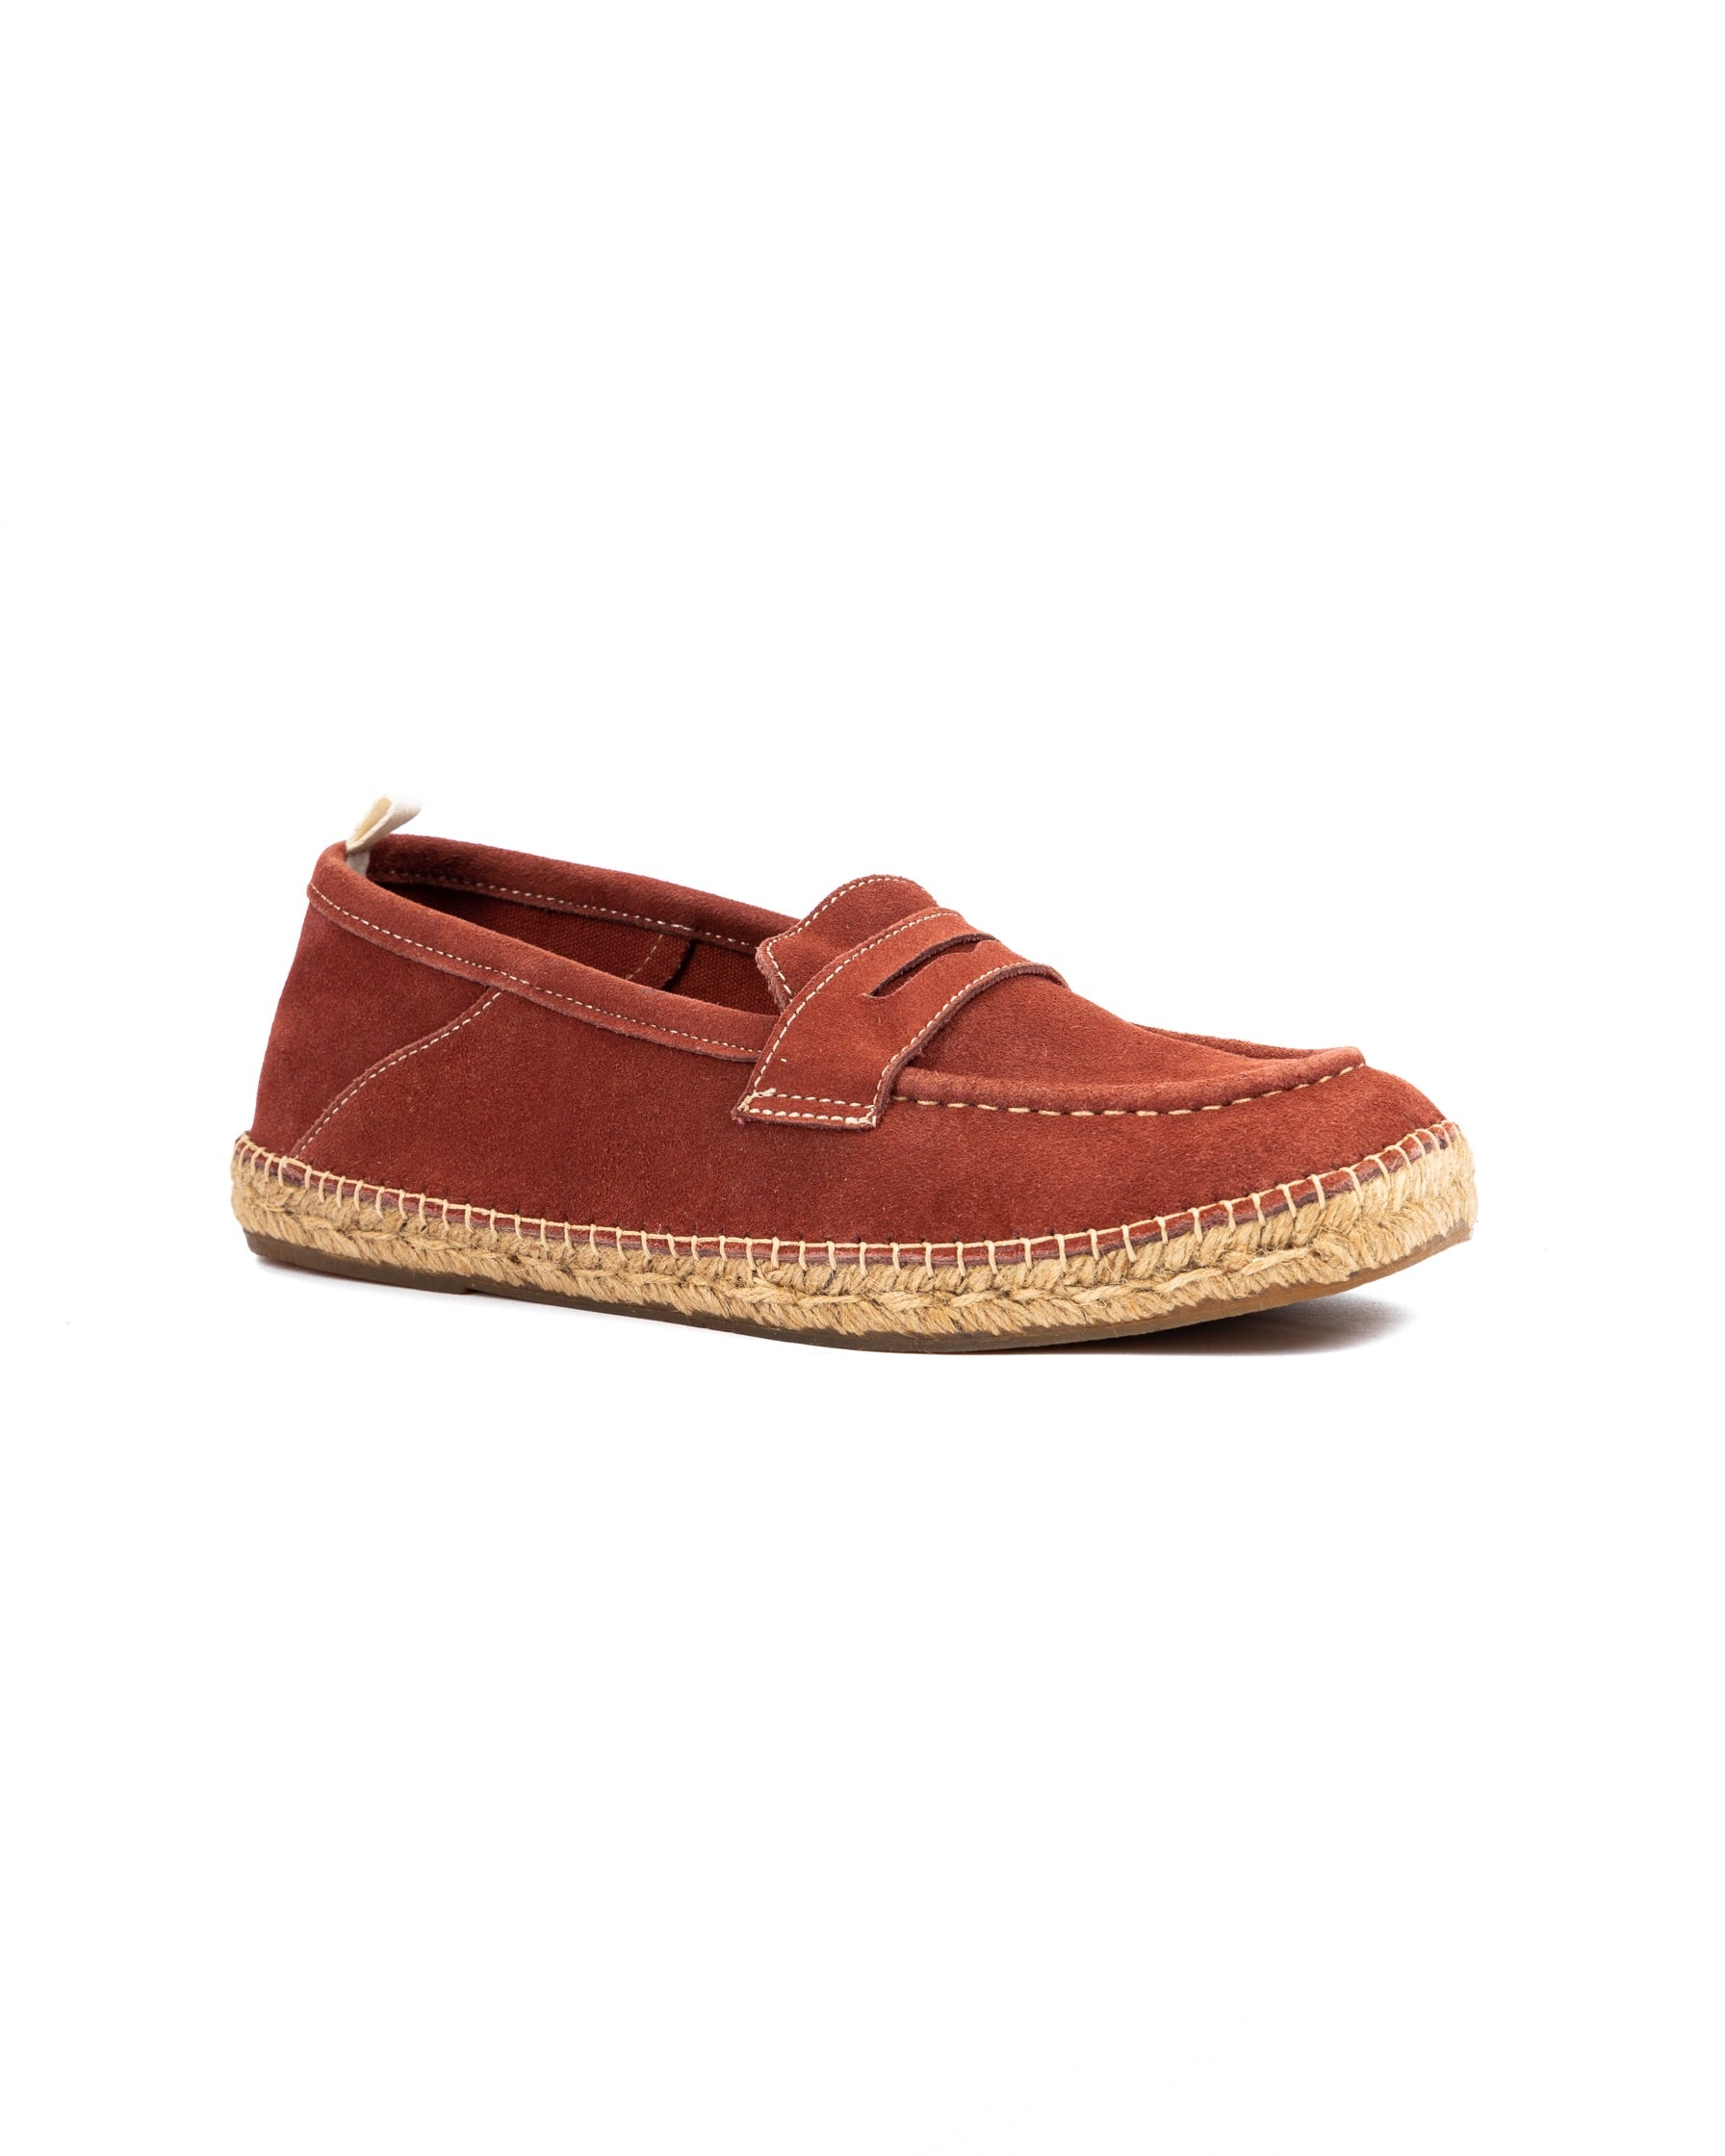 Roma - burgundy suede moccasin with rope sole